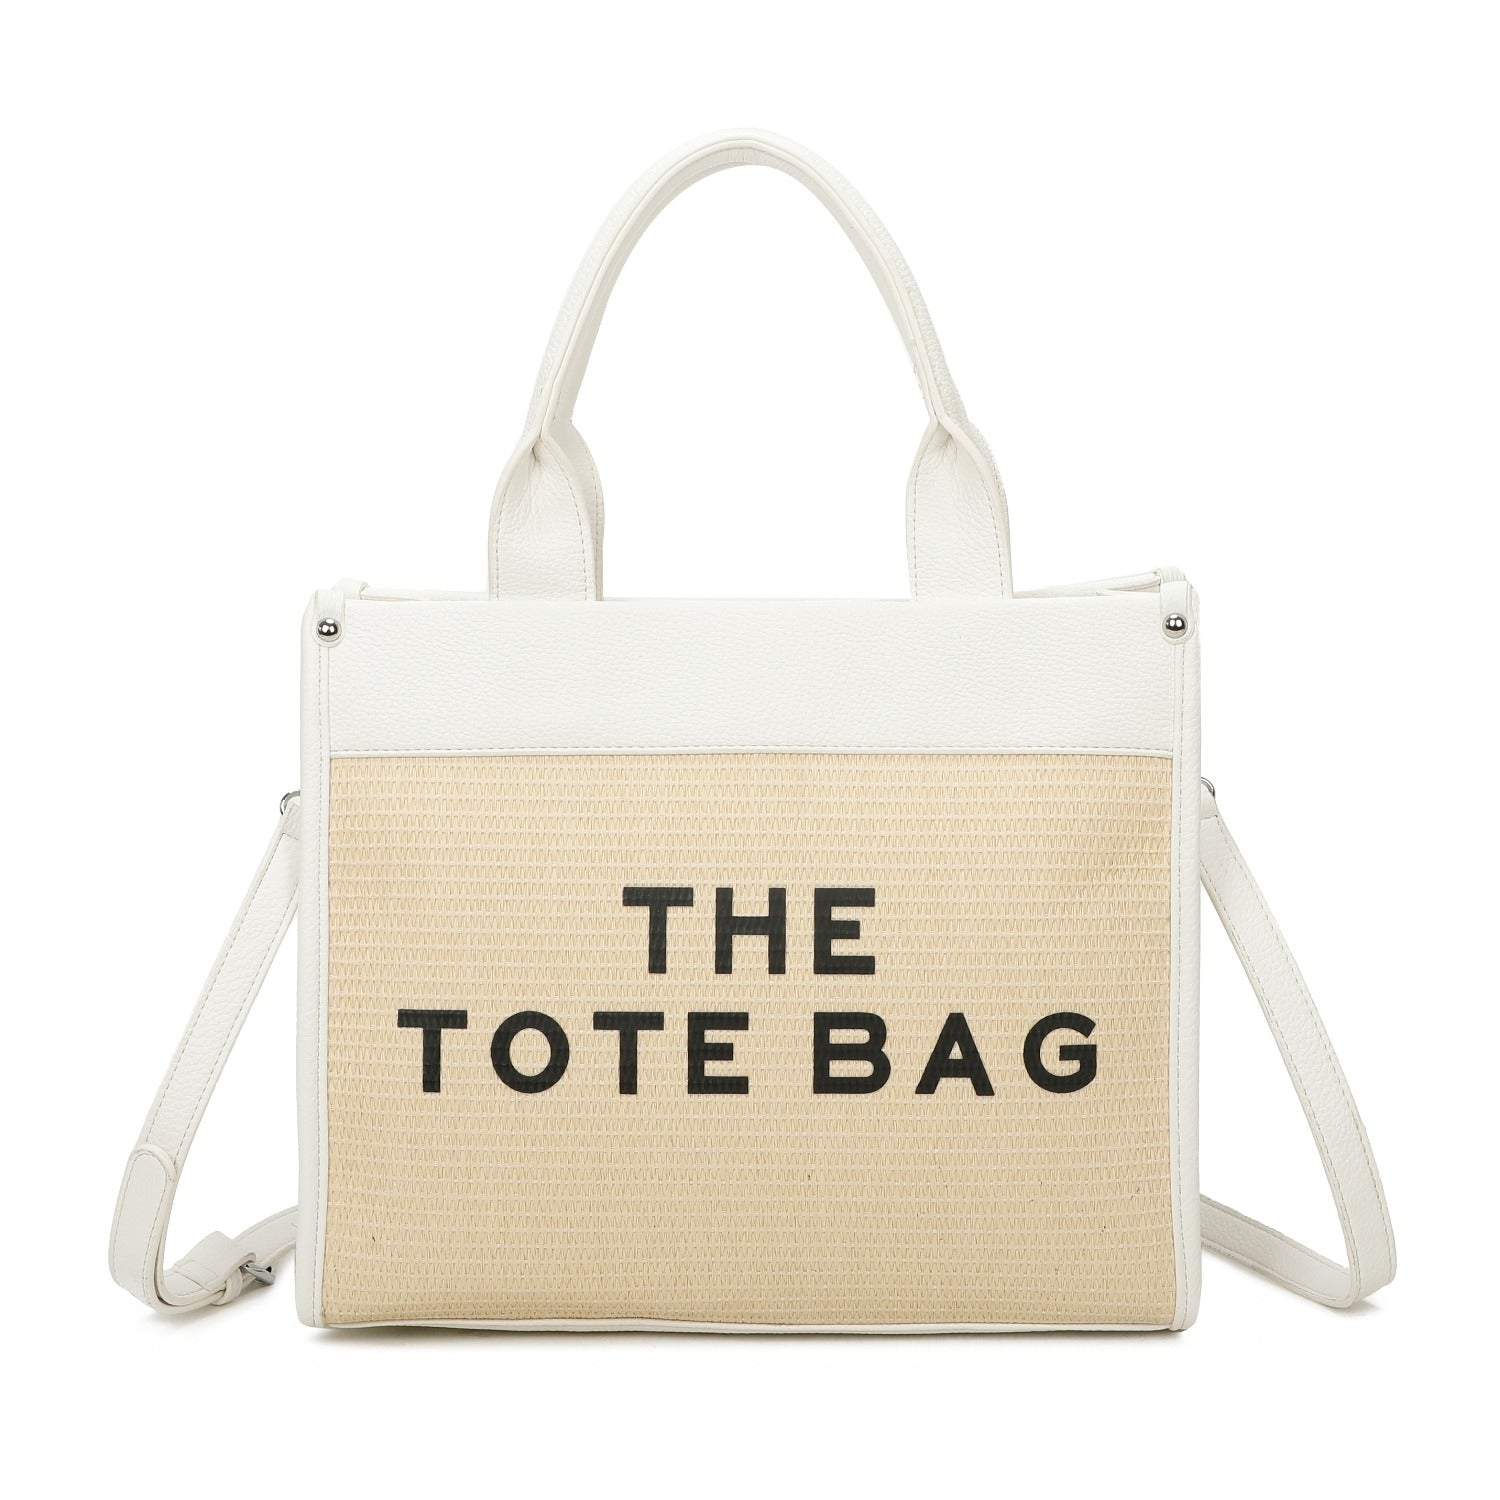 Craze London Synthetic Tote Bag with Internal Zip Pocket